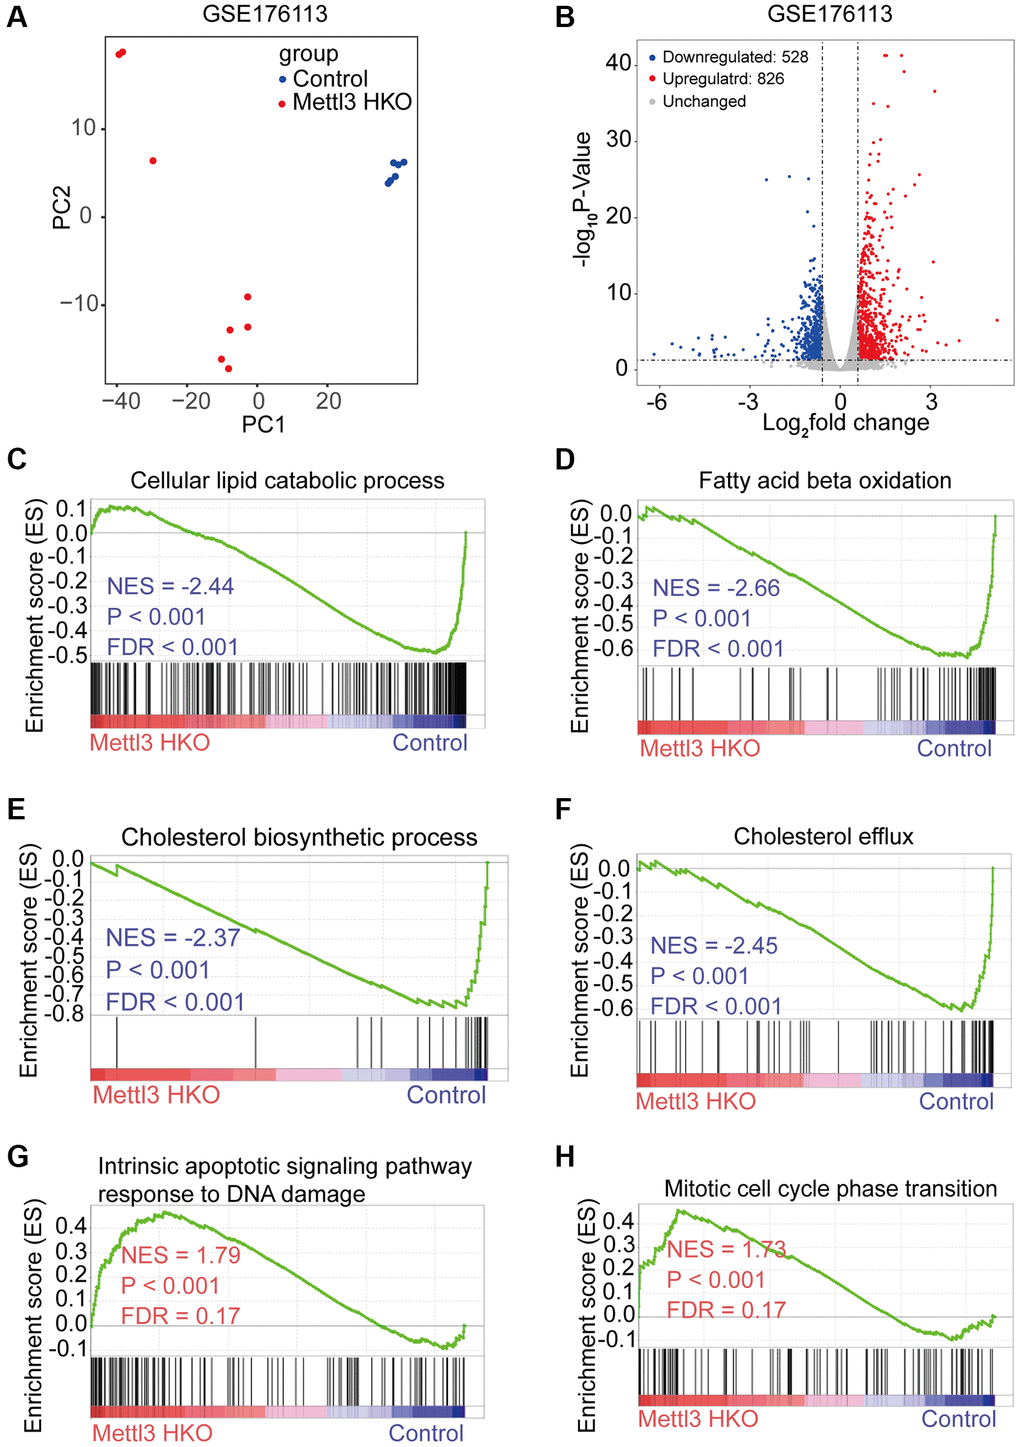 Specific knockout of Mettl3 in hepatocytes results in downregulating lipid metabolism-related genes. (A) Principal component analysis (PCA) plot showing reproducibility among the replicates of each group. (B) Volcano plot showing the differential expression of protein-coding genes in the GSE176113 dataset. (C–H) Gene set enrichment analysis (GSEA) plot of enrichment of indicated signatures in Mettl3 HKO livers using the C5 MSigDB database.